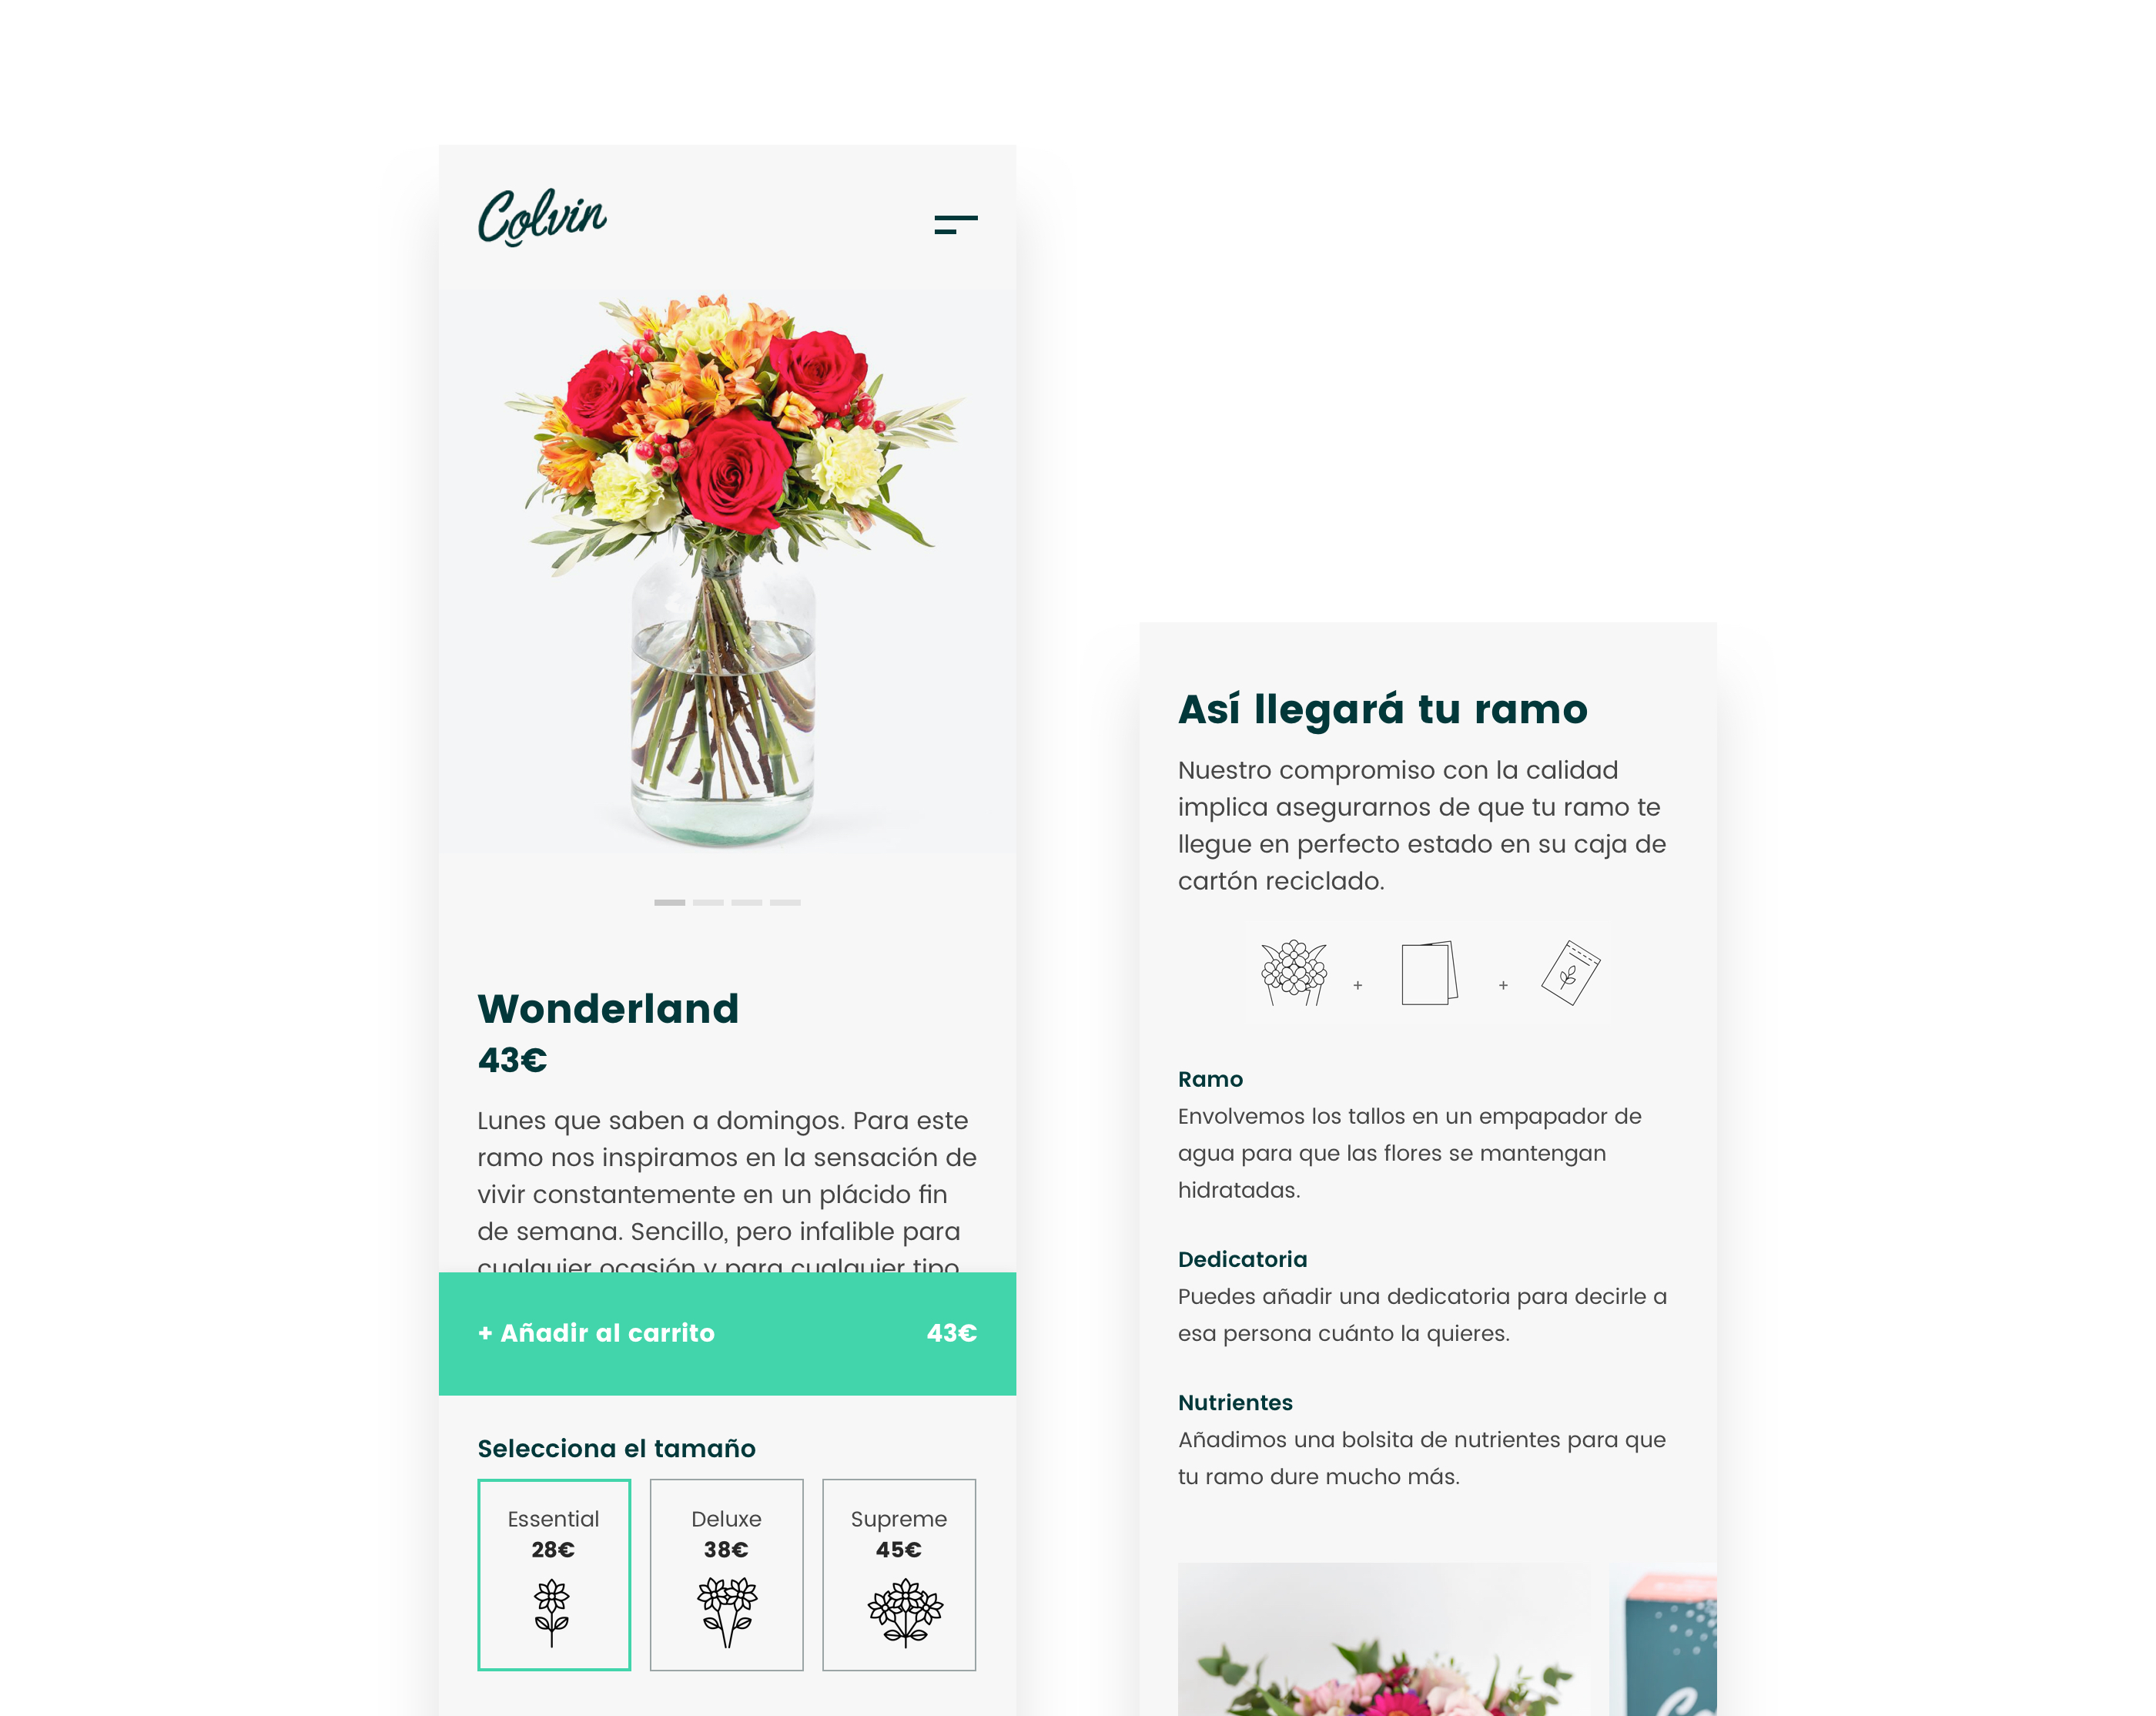 Colvin Product page redesign